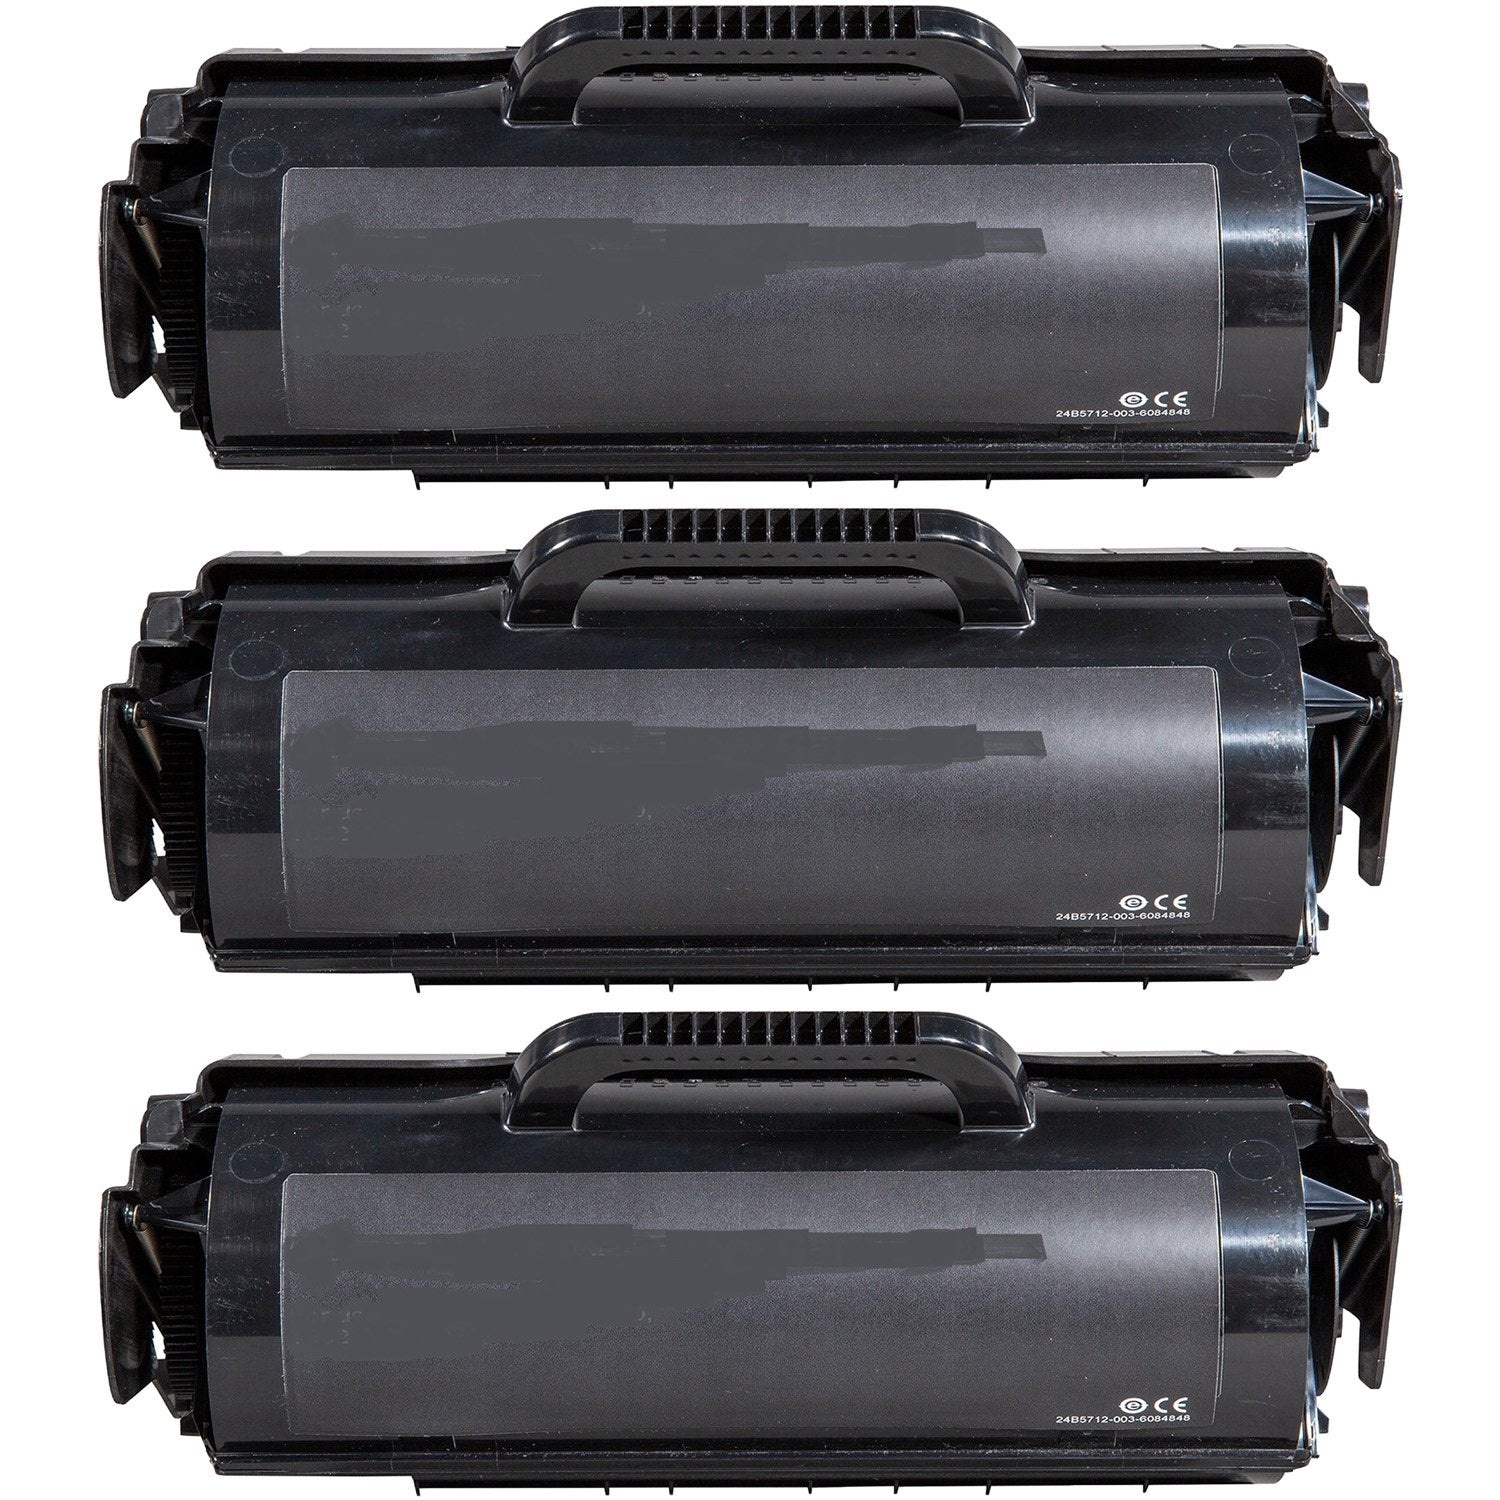 Absolute Toner Compatible Lexmark X651H11A Black Toner Cartridge | Absolute Toner Lexmark Toner Cartridges